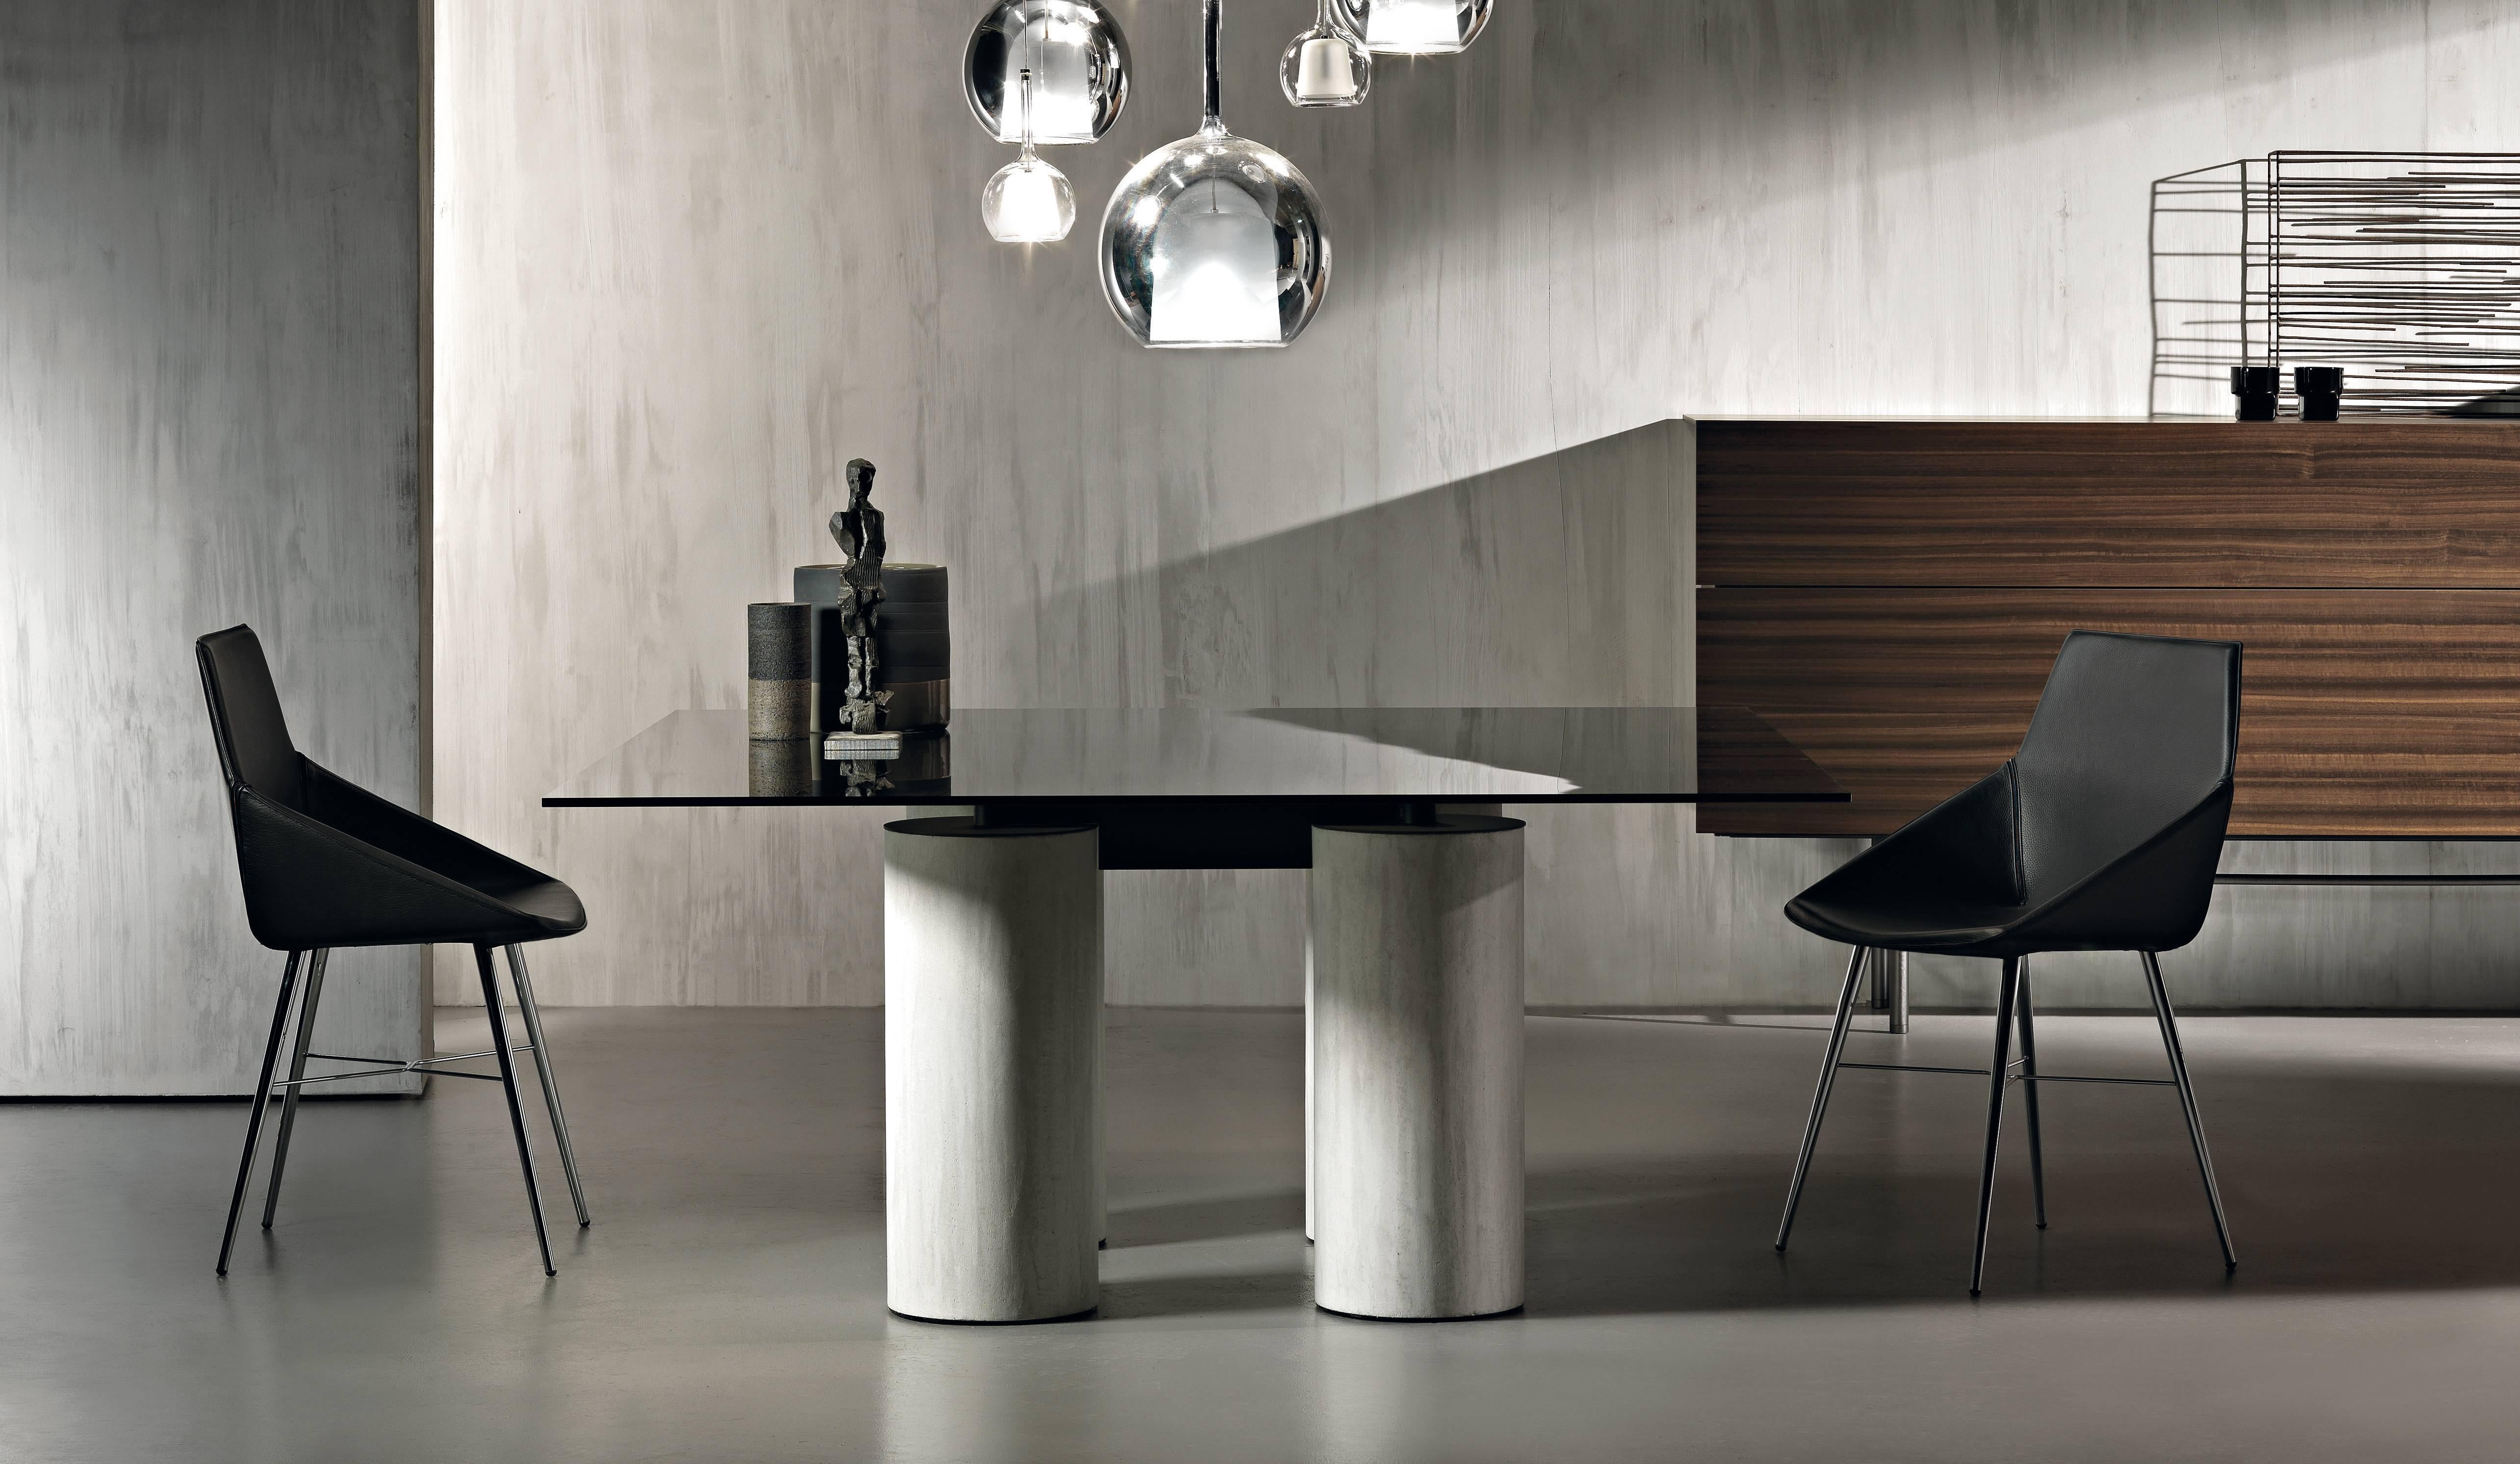 Table with a unique and timeless design in which the apparent thinness and lightness of the glass top contrasts with the considerable diameter of the columns. These columns acquire greater expressive force from the different colors and textures of